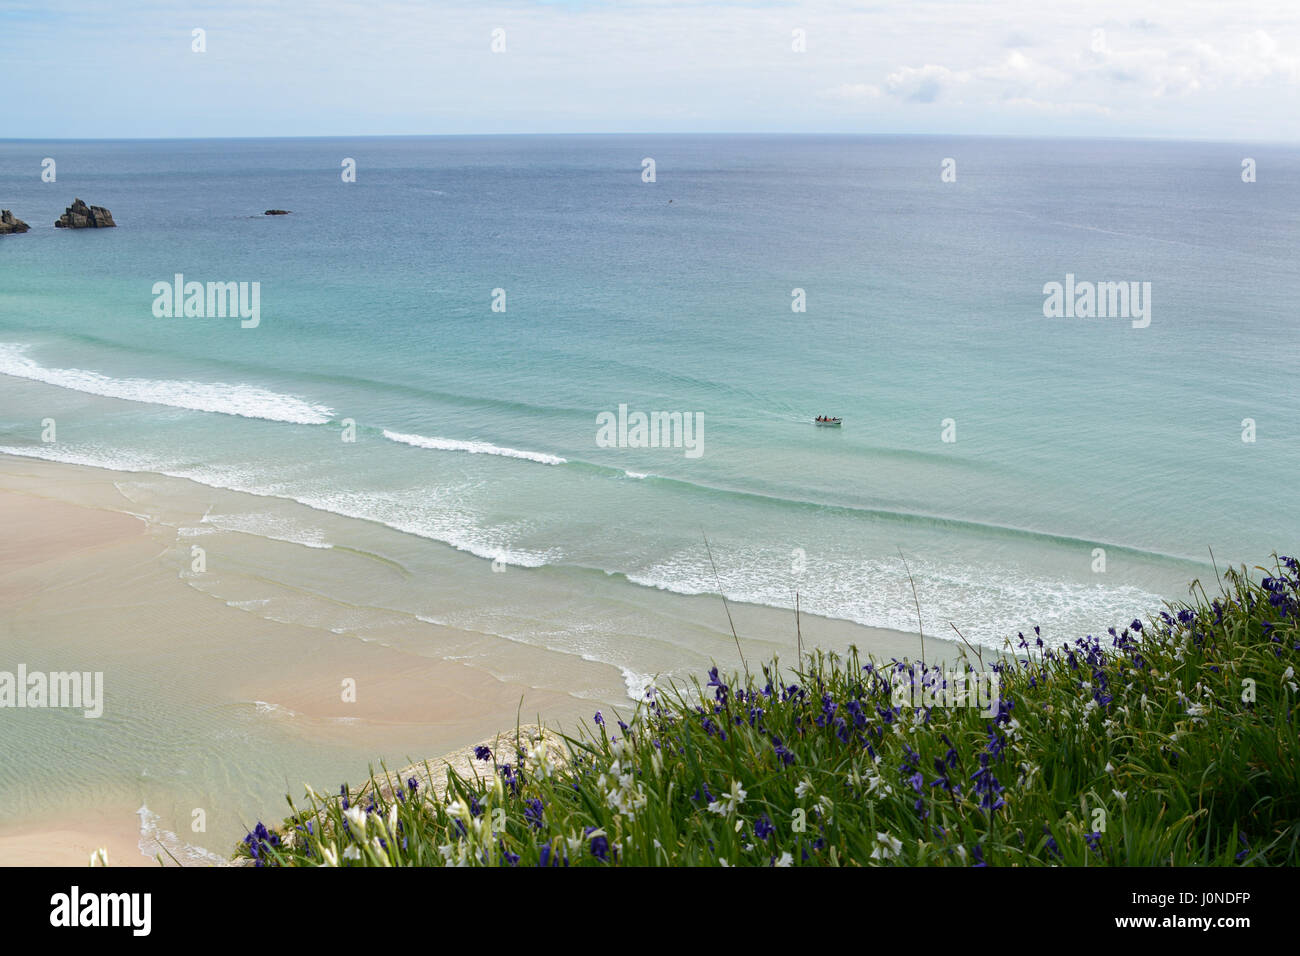 Treen, Cornwall, UK. 15th April 2017. UK Weather. A warm and sunny afternoon on the beach at Treen, and the south west coast path. With people enjoying the unspoilt beach and clear seas. Credit: cwallpix/Alamy Live News Stock Photo